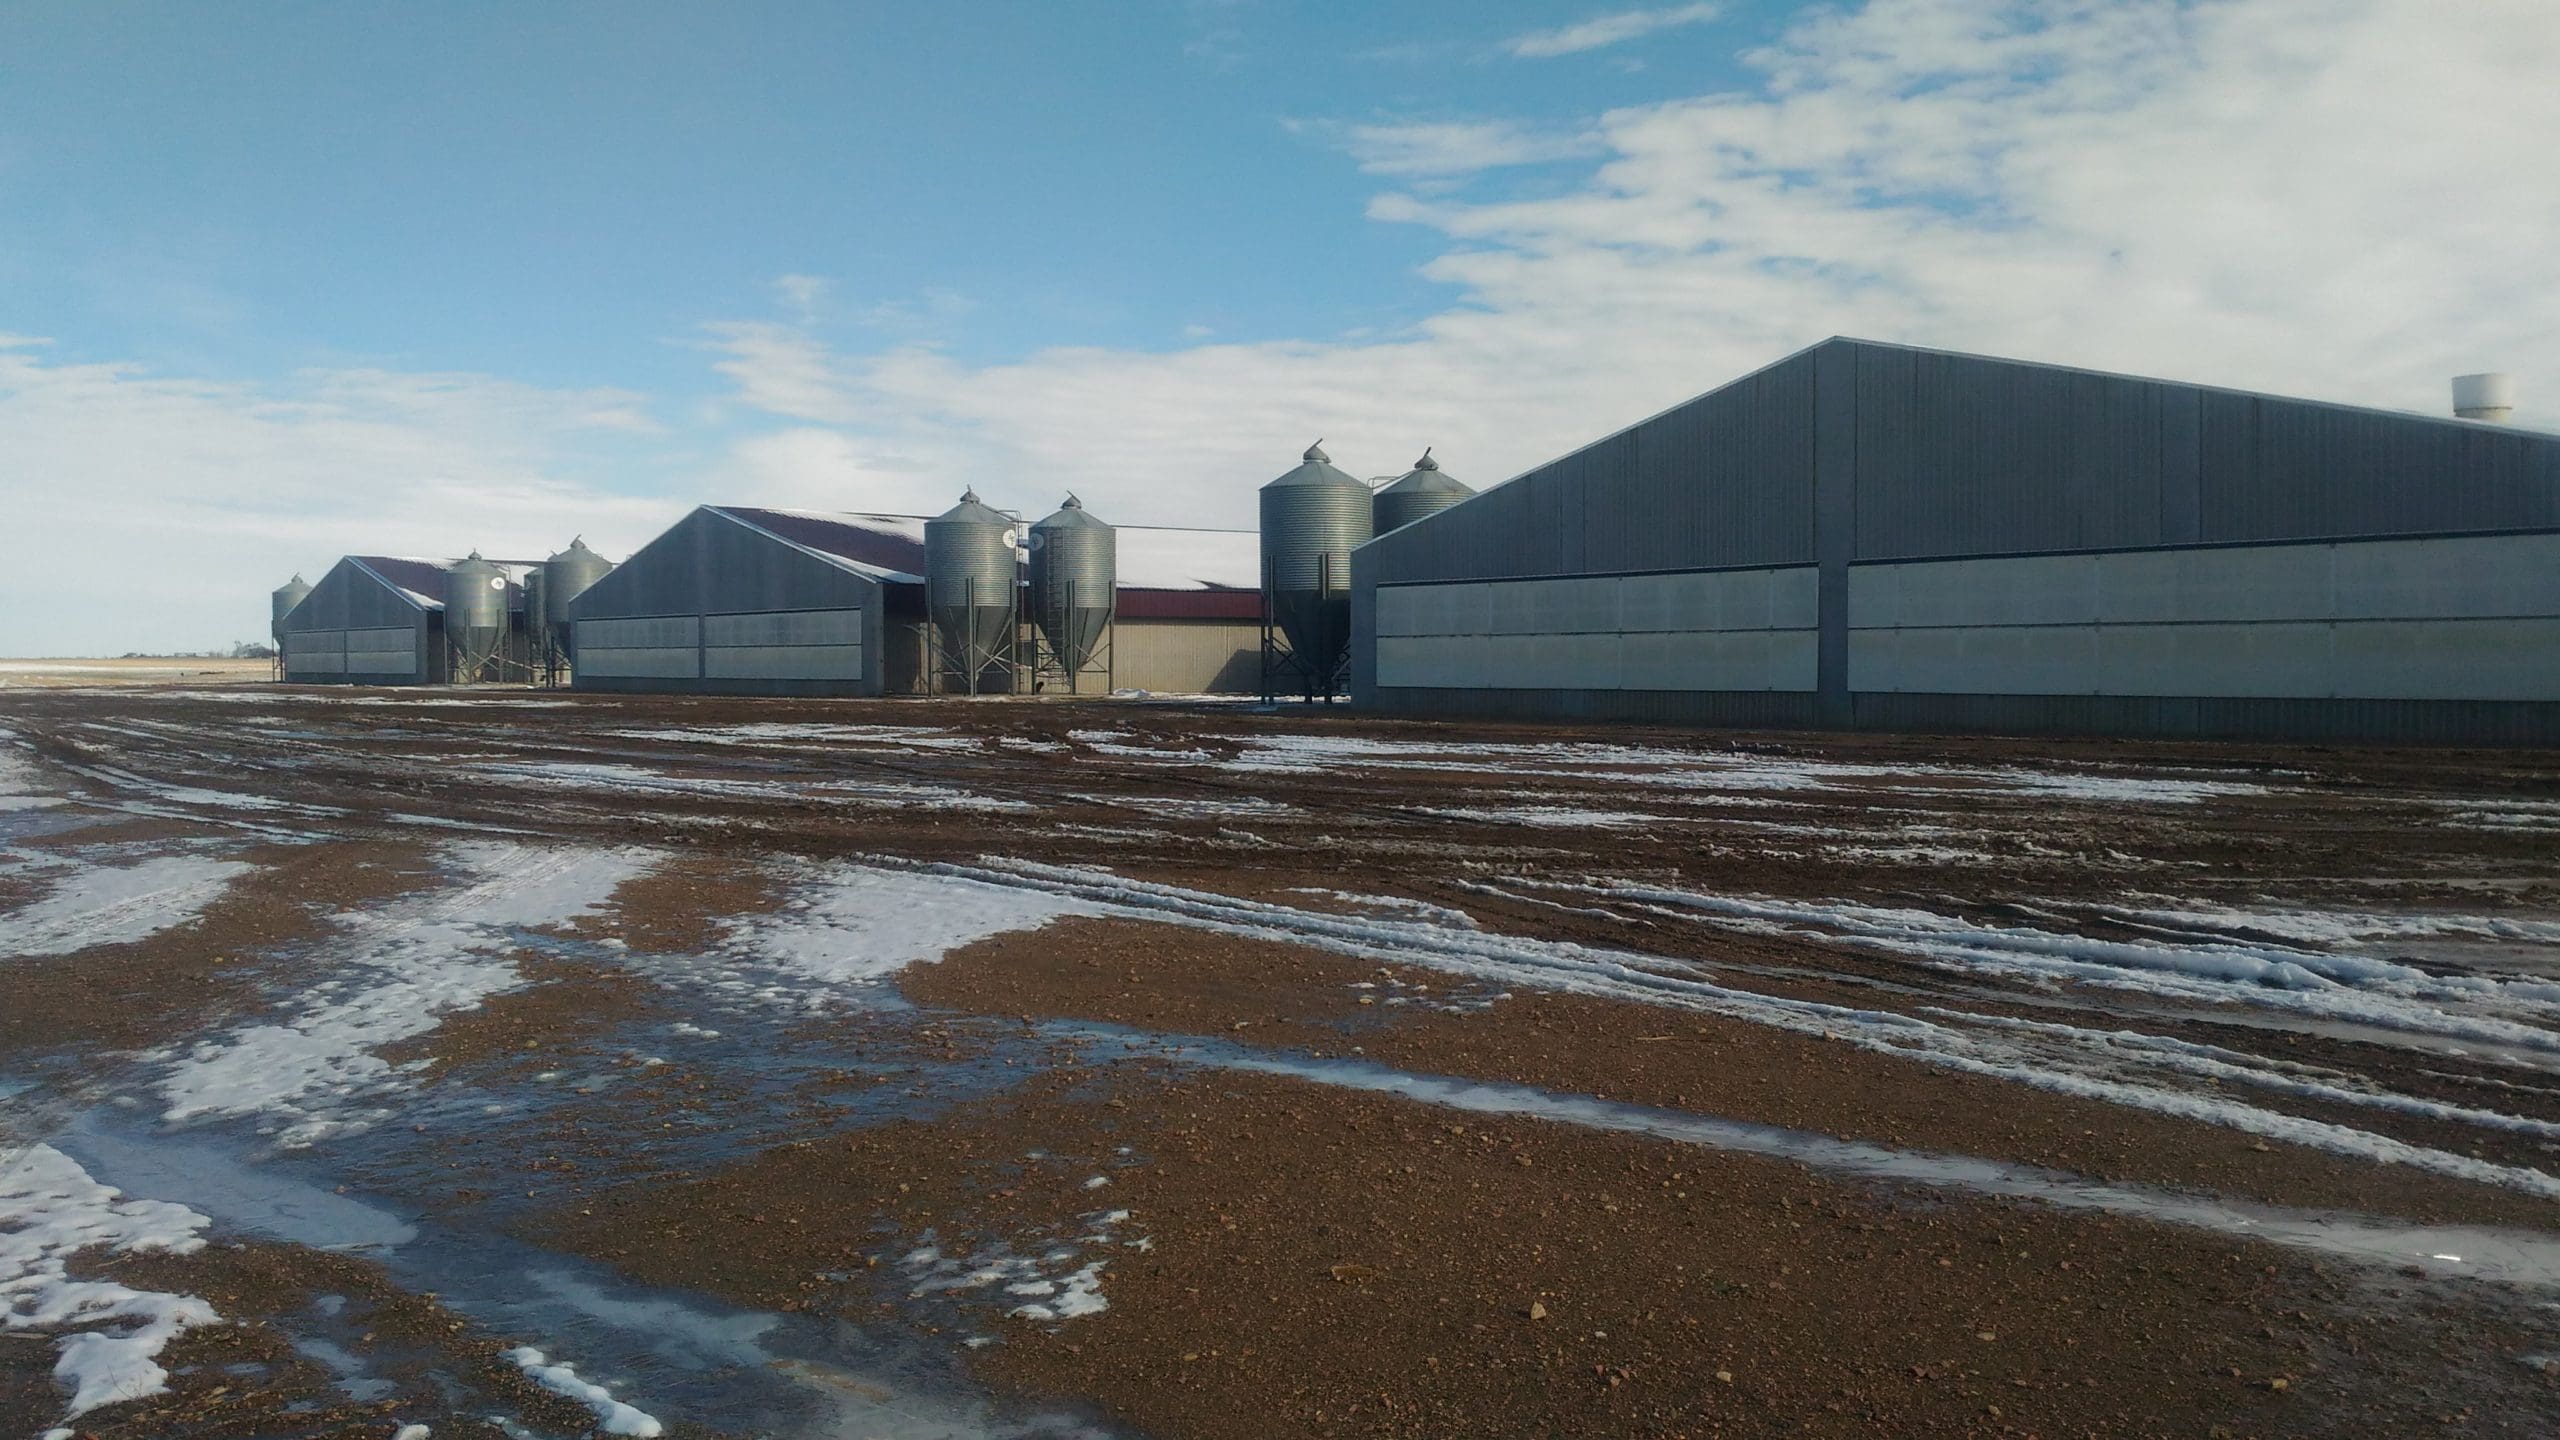 agricultural storage facilities in a field surrounded by melting snow